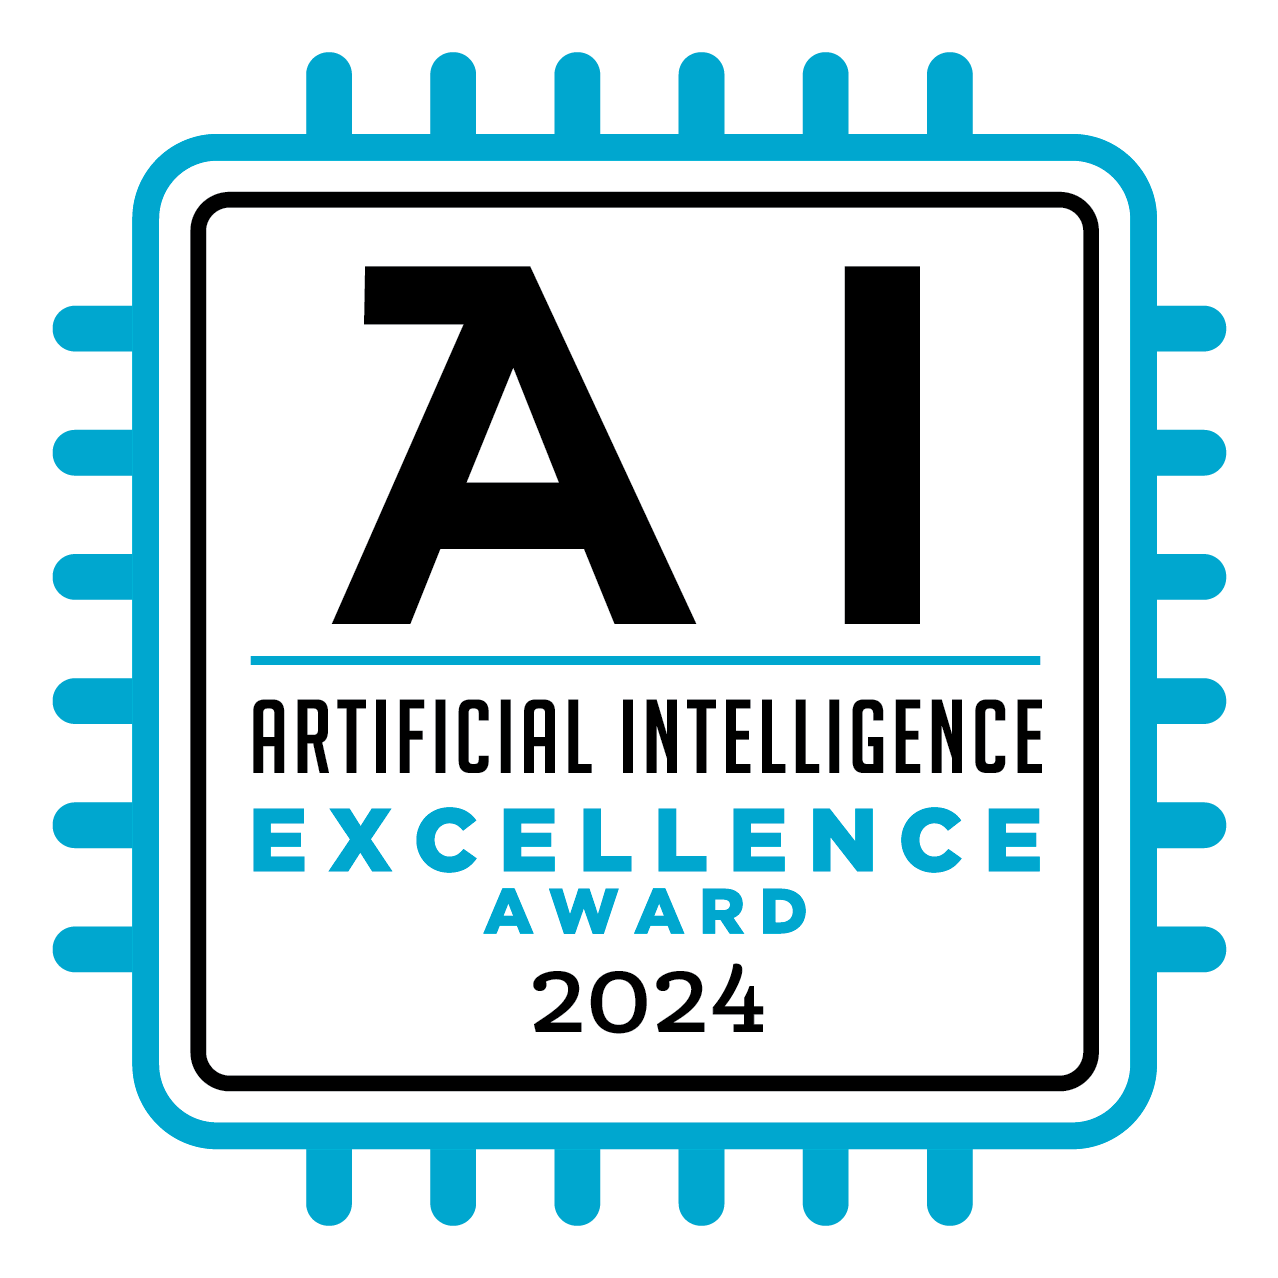 SearchUnify’s Intelligent Chatbot Named Winner in 2022 Artificial Intelligence Excellence Awards